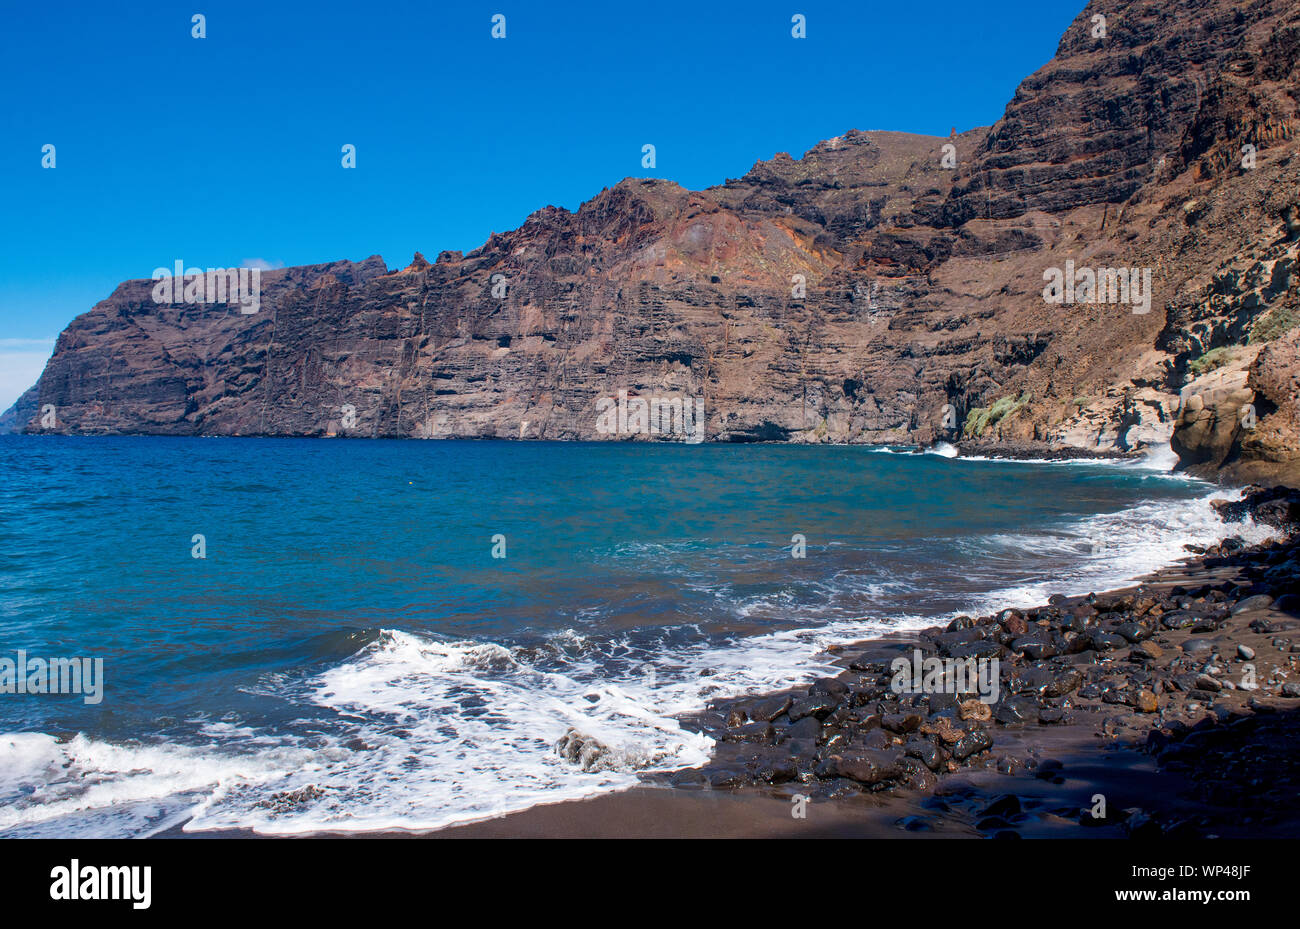 The dramatic towering volcanic cliffs of Los Gigantes, Tenerife, Canary Islands.  Black stony sand beach, breaking waves blue Atlantic Ocean and sky. Stock Photo